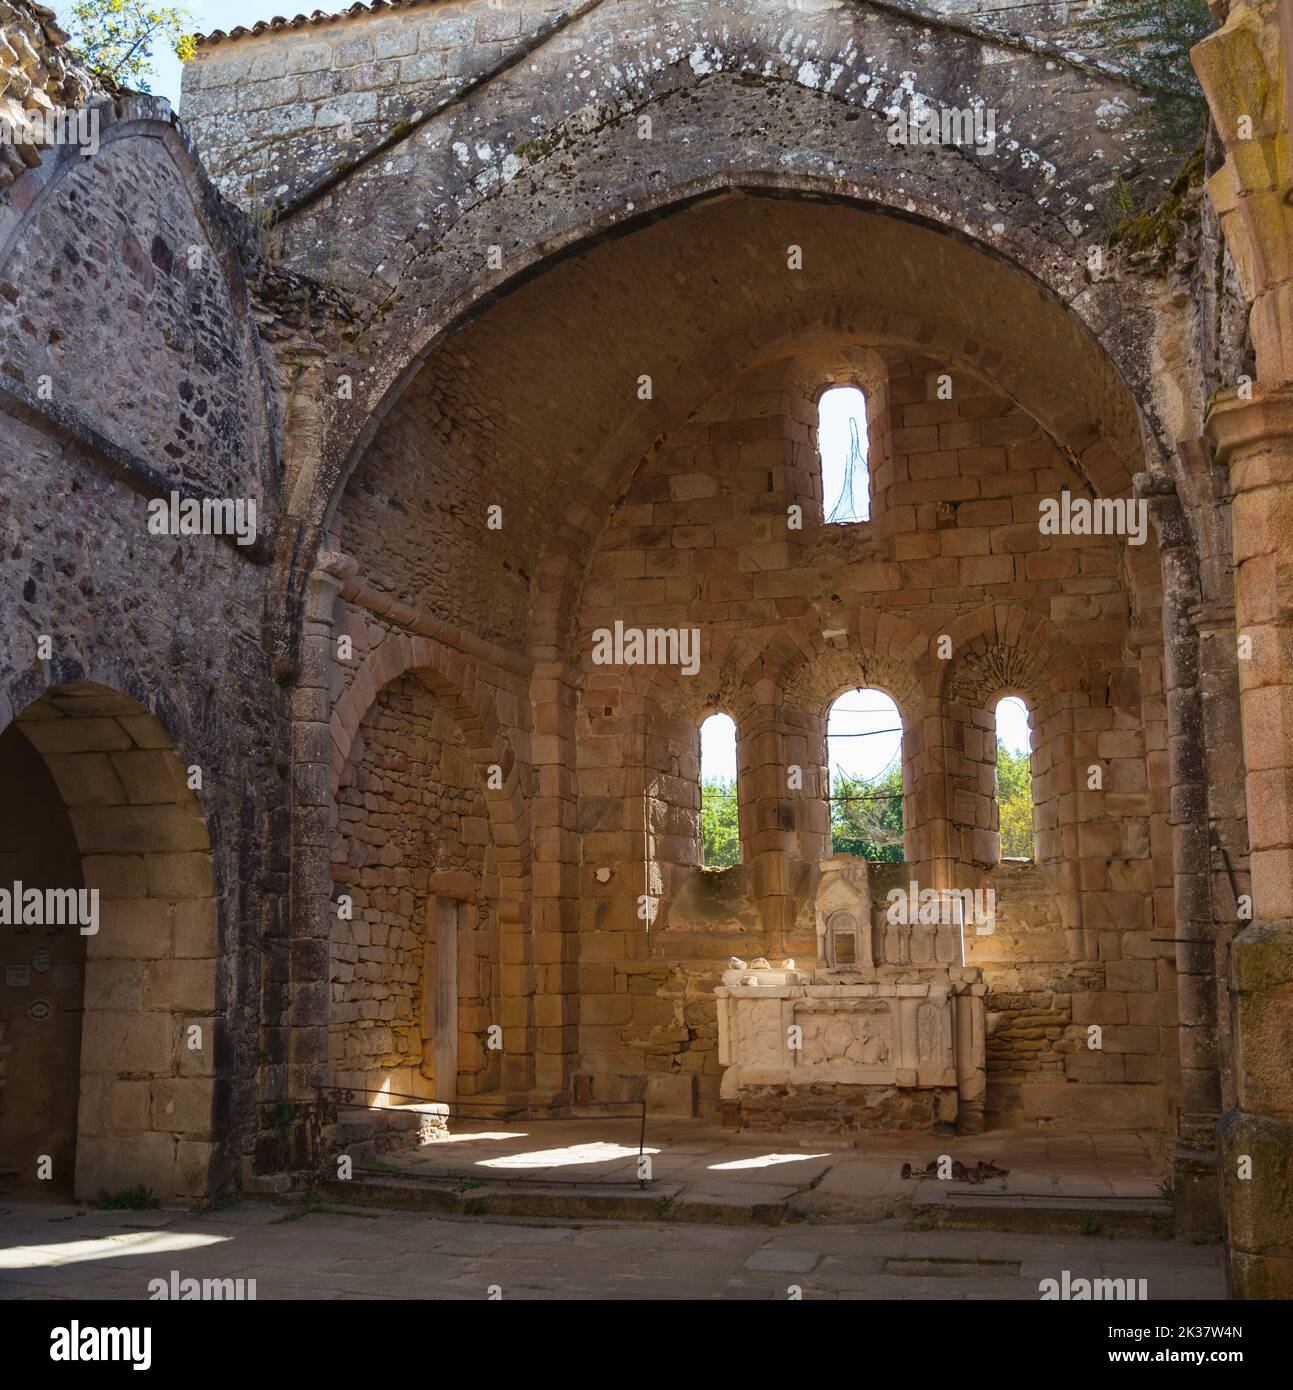 remains of the church of oradour sur glane after the second world war Stock Photo